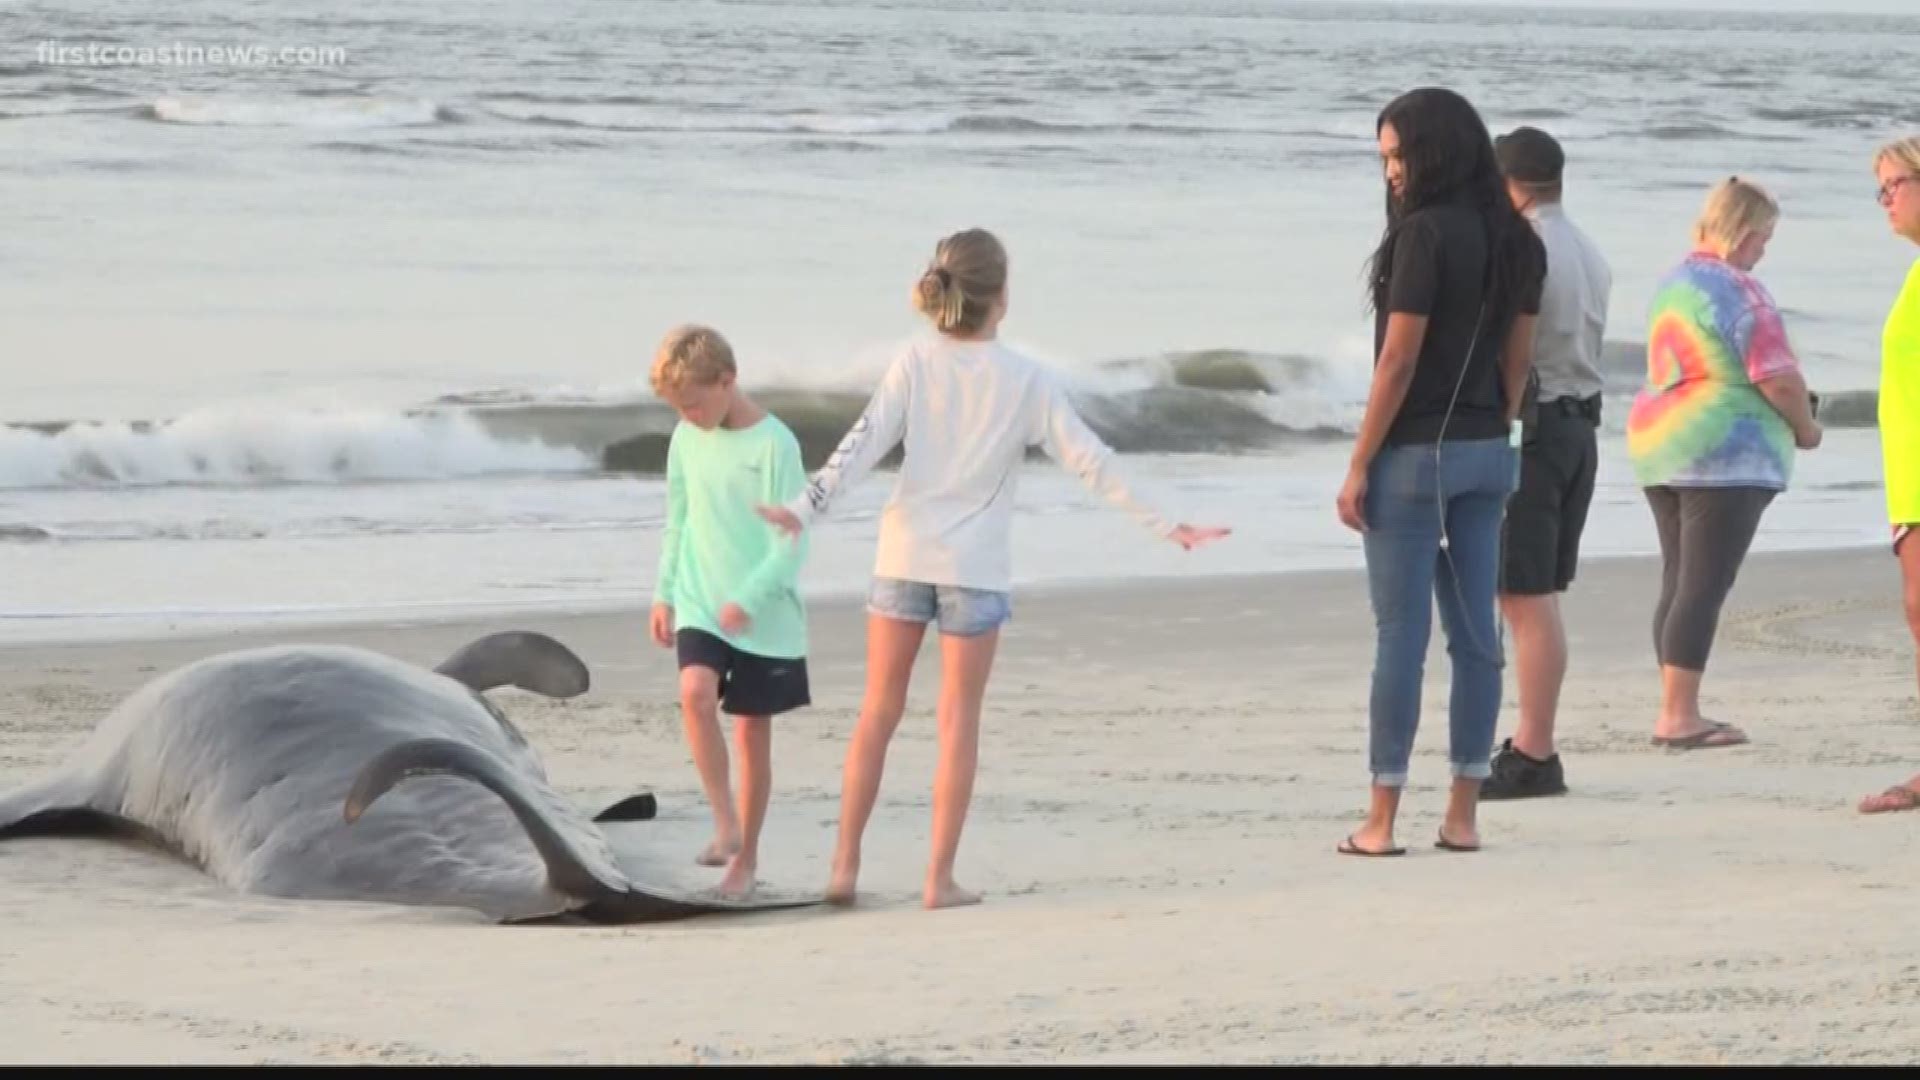 Officials confirm 47 whales beached themselves at St. Simons Island